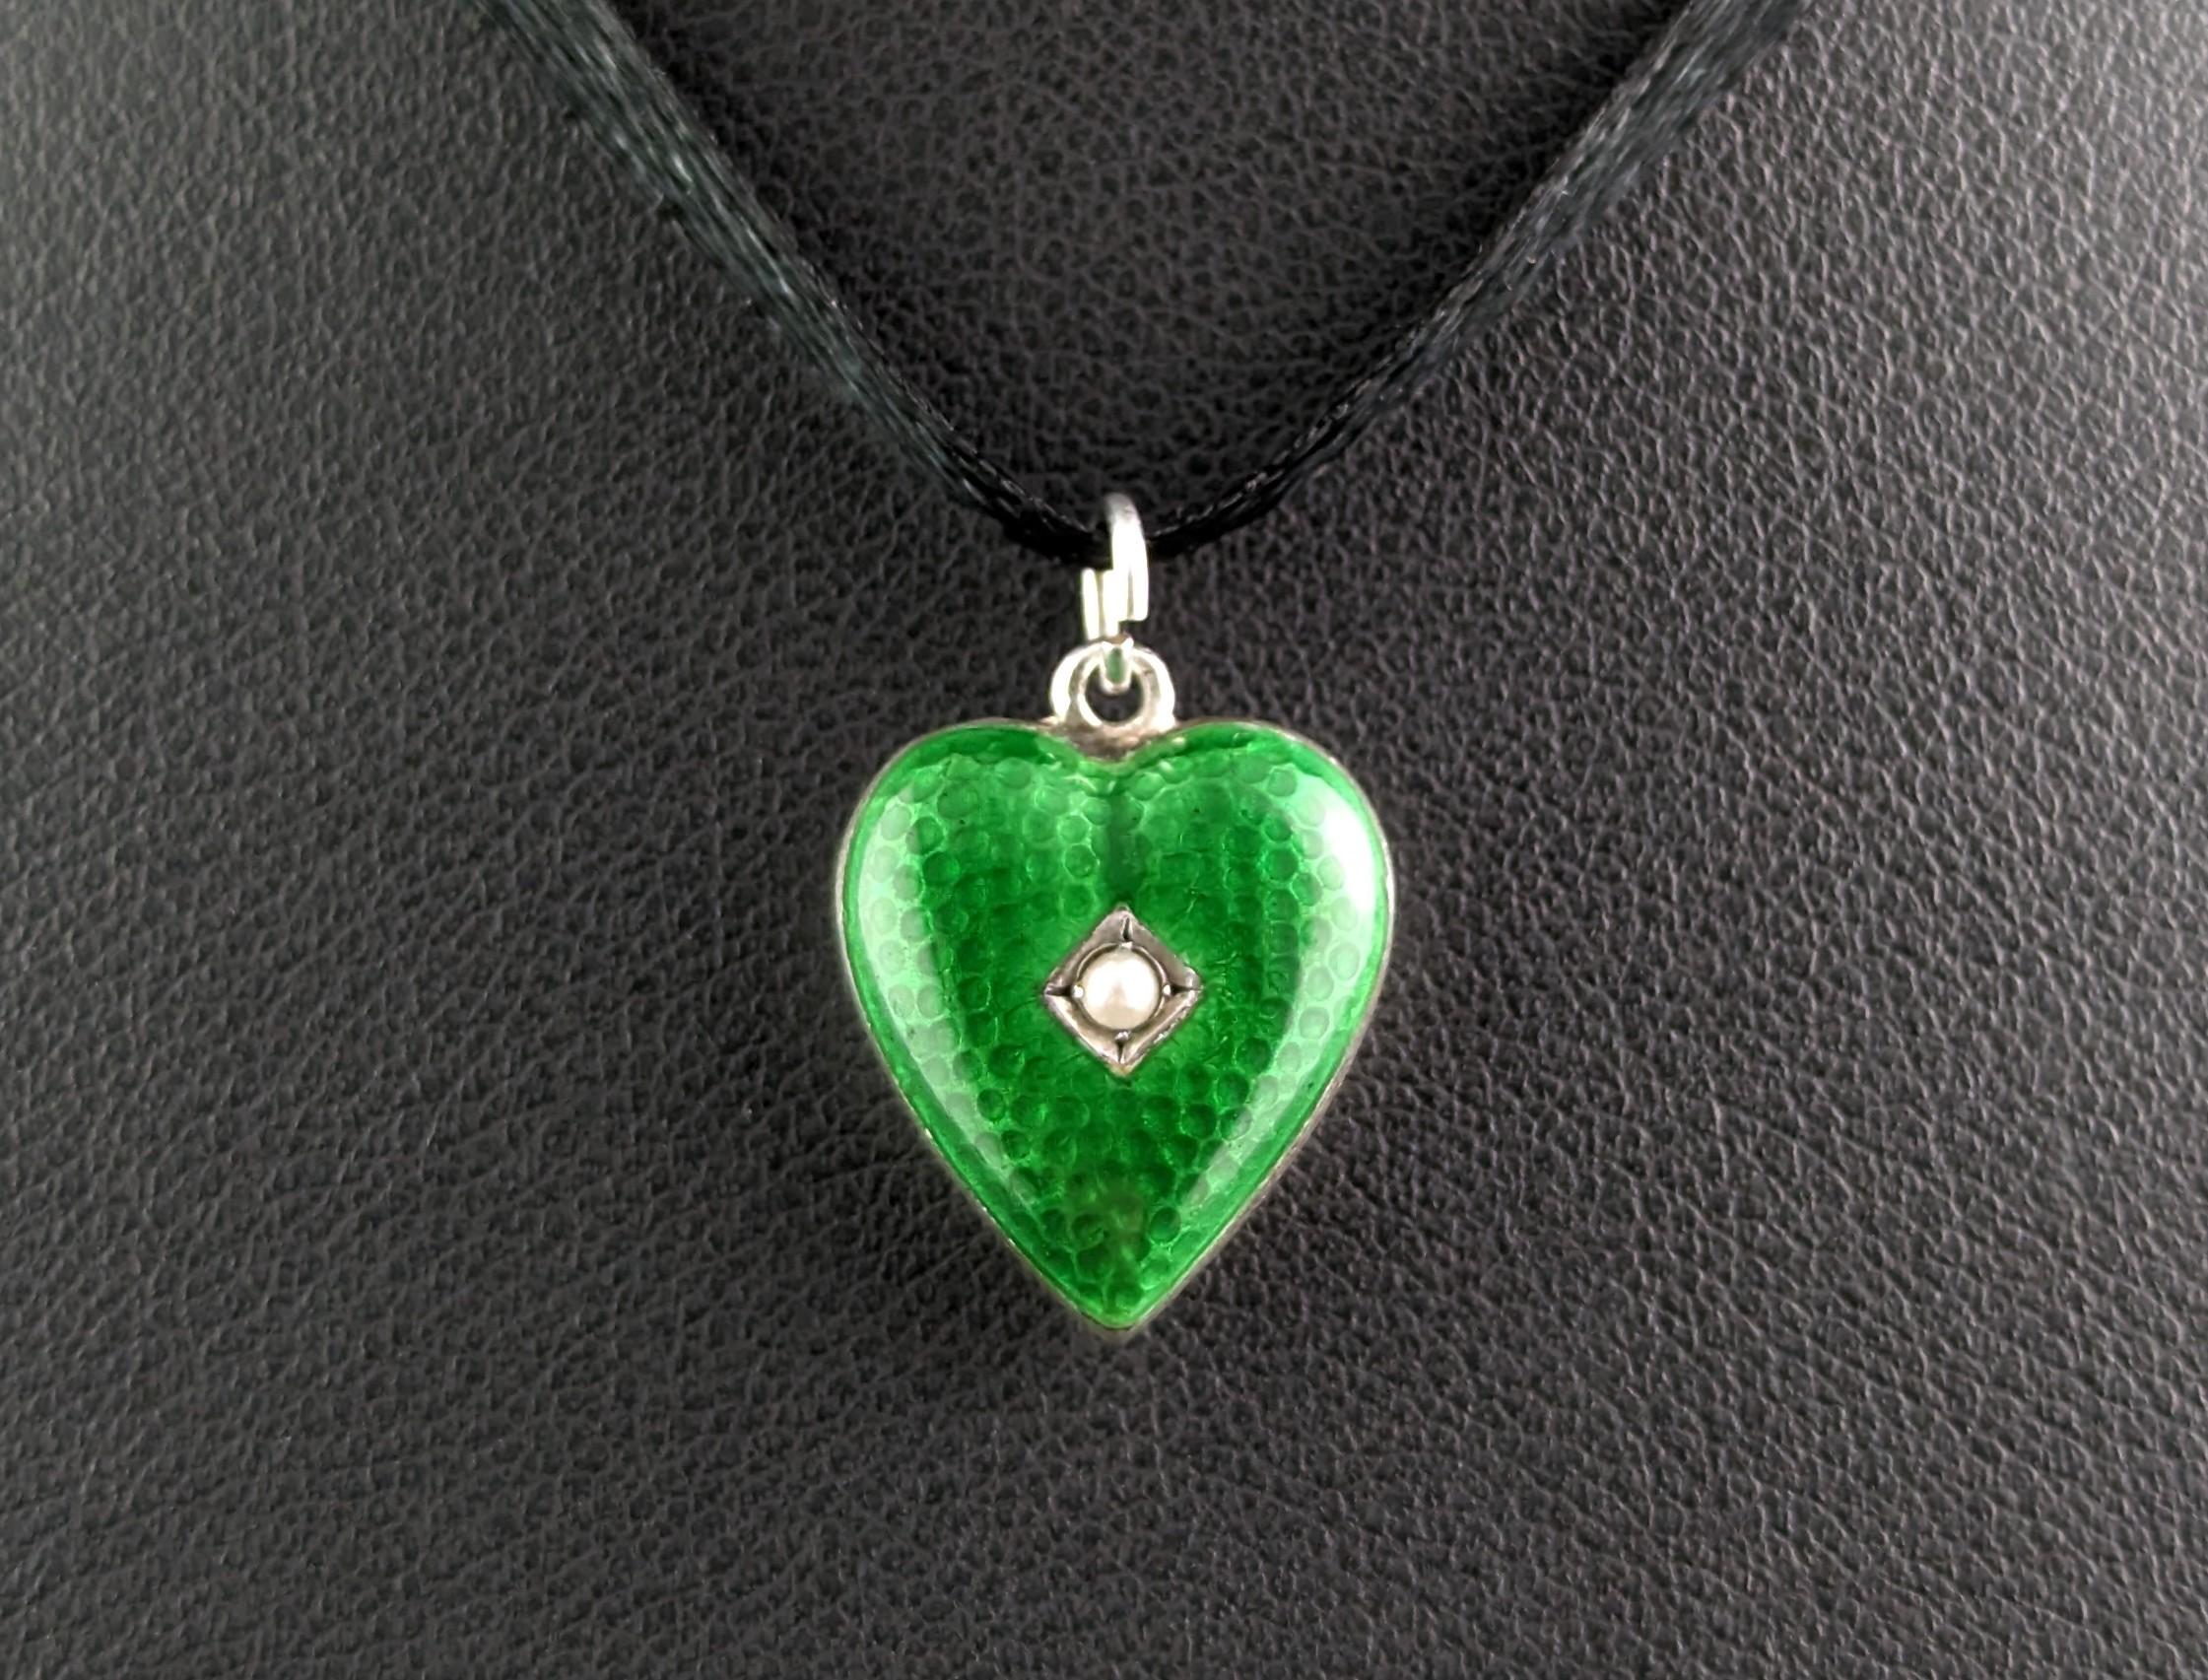 Vintage Art Deco Silver and Green Enamel Heart Pendant, Seed Pearl 1